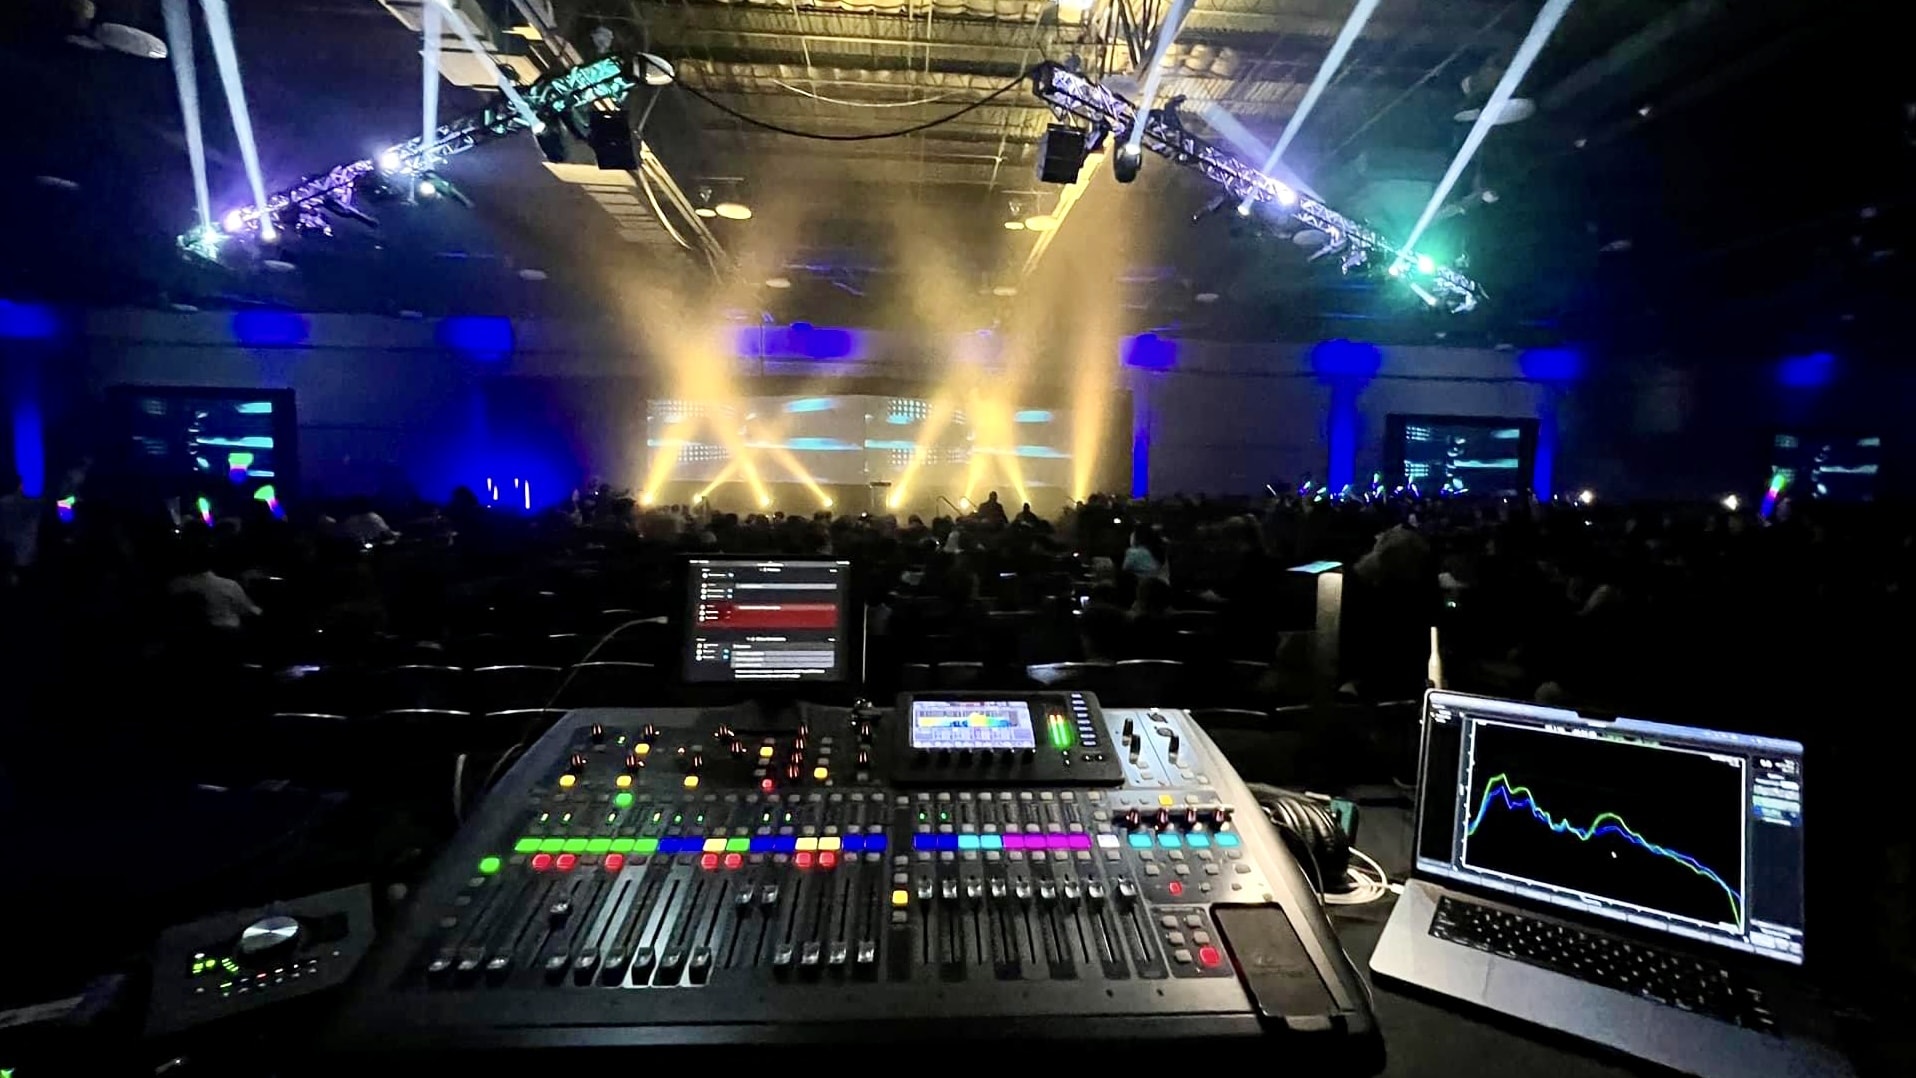 White Tie Productions Selects 120 Alfalite LED Panels